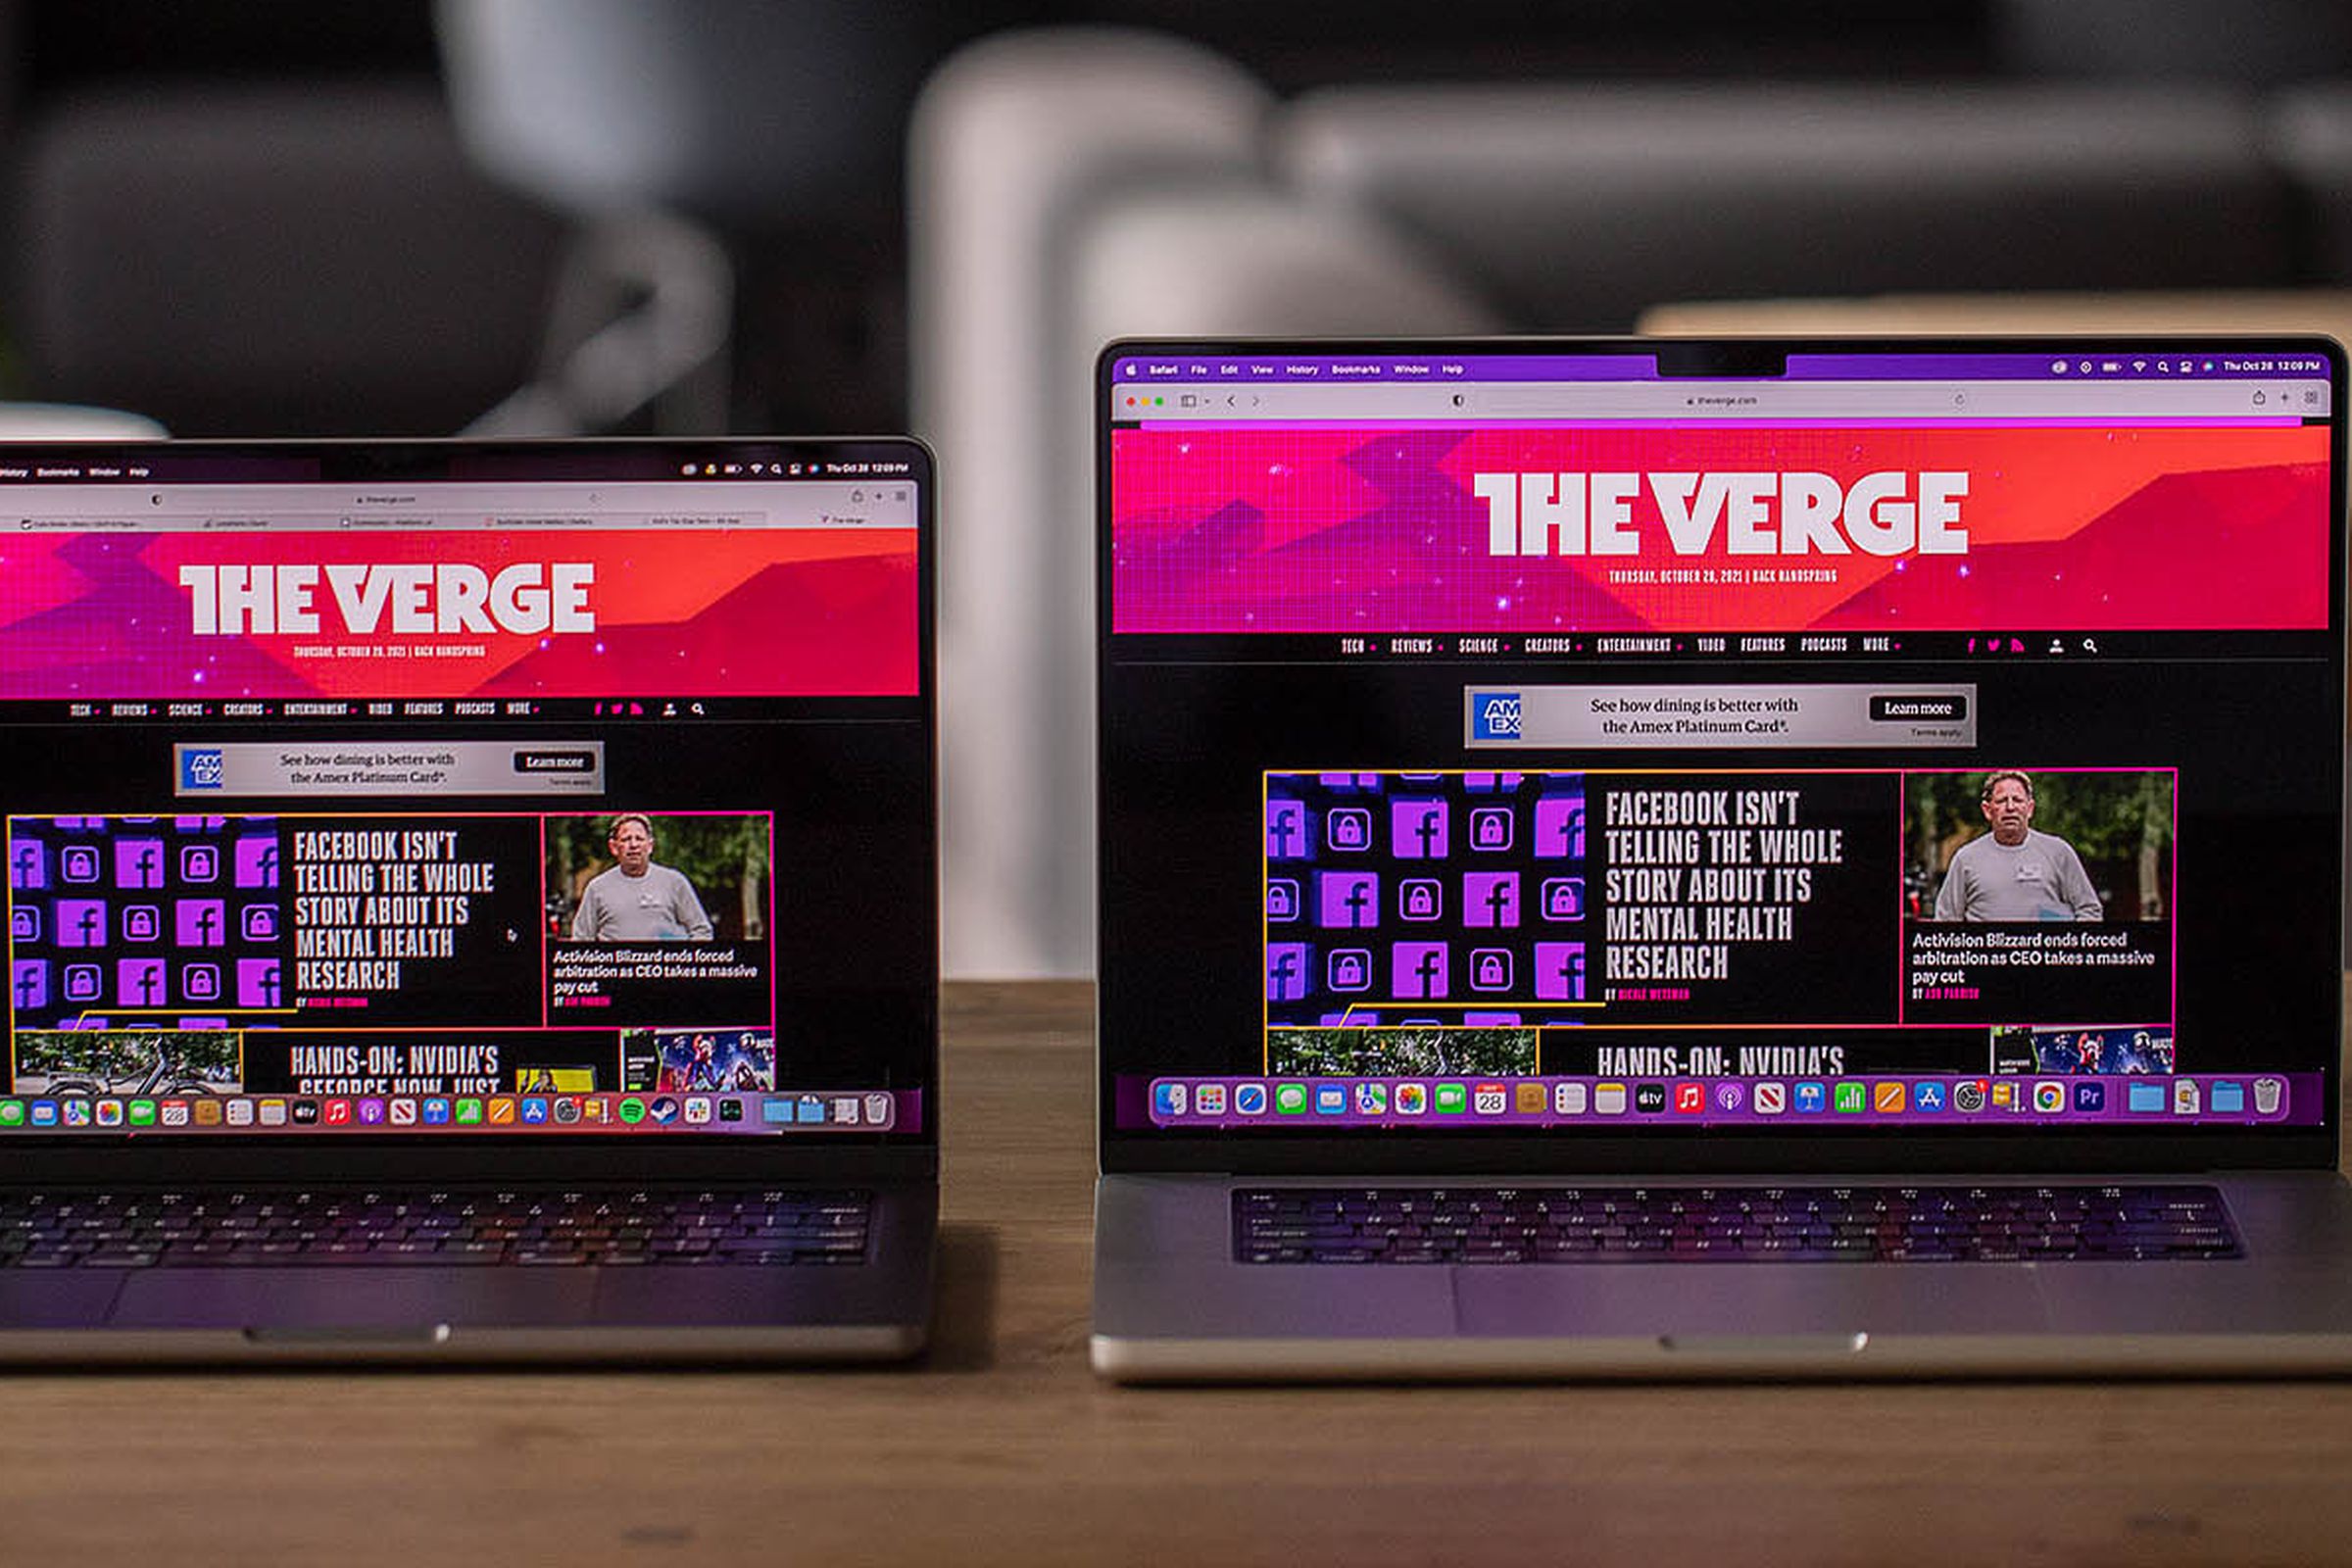 The MacBook Pro 14 and MacBook Pro 16 side-by-side on a table, both displaying The Verge homepage.